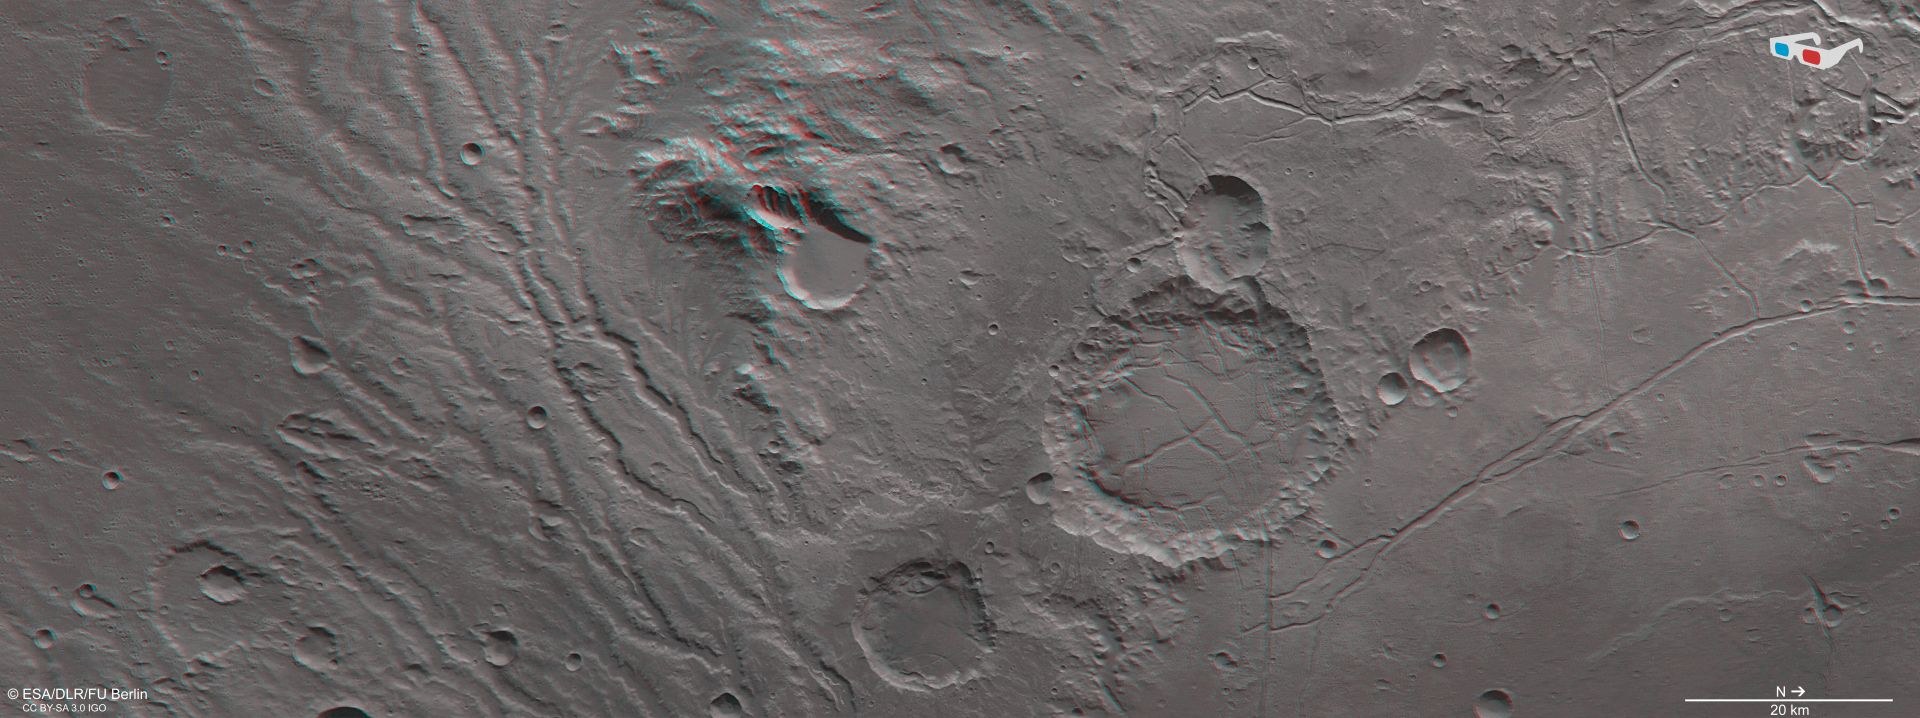 An anaglyph image of the western part of Arda Valle